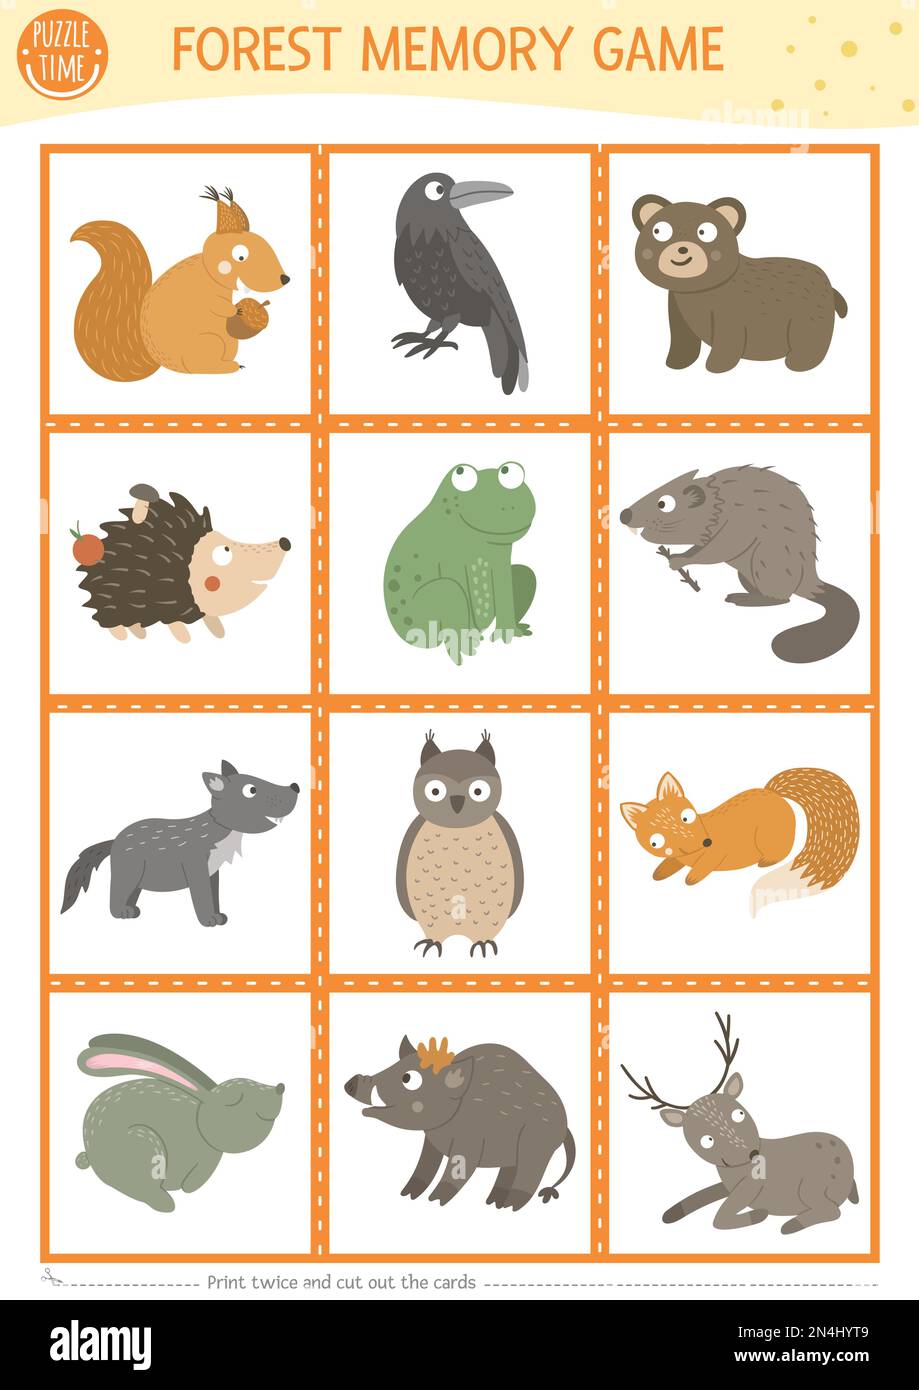 Vector forest animals and birds memory game cards with squirrel, raven, bear. Woodland matching activity. Remember and find correct card. Simple print Stock Vector